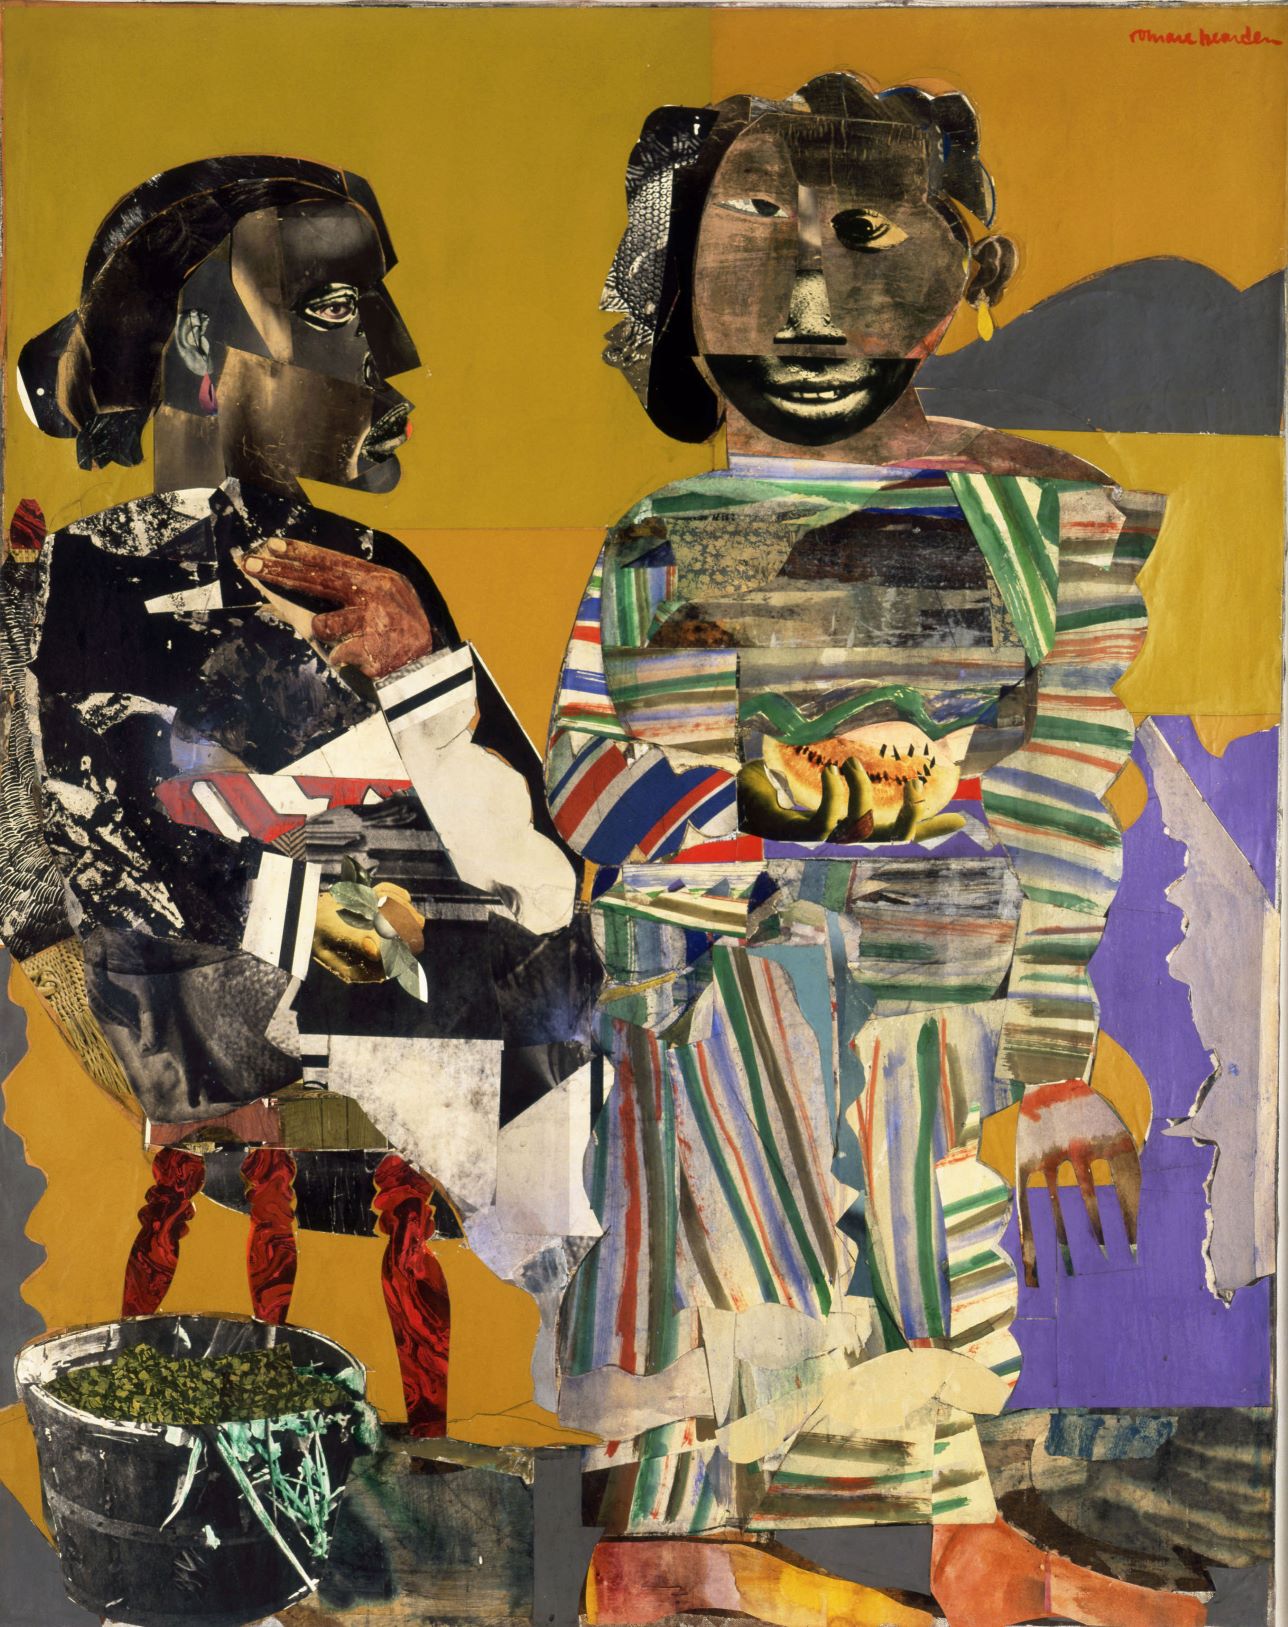 Collaged image of two figures